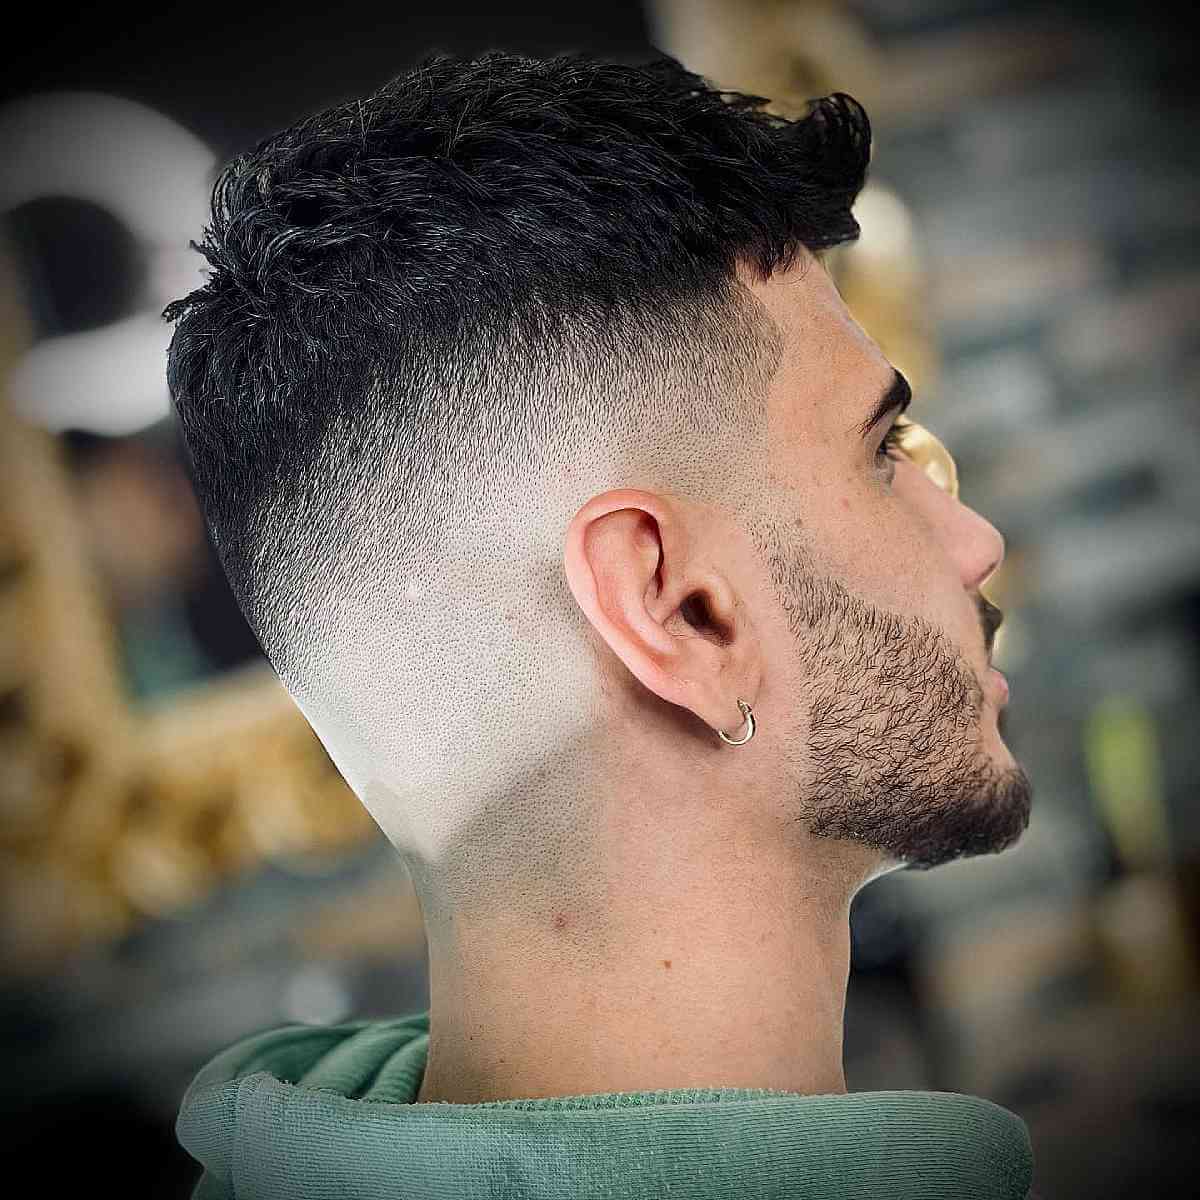 26 Trendy Bald Fade Haircut Ideas for Men Right Now